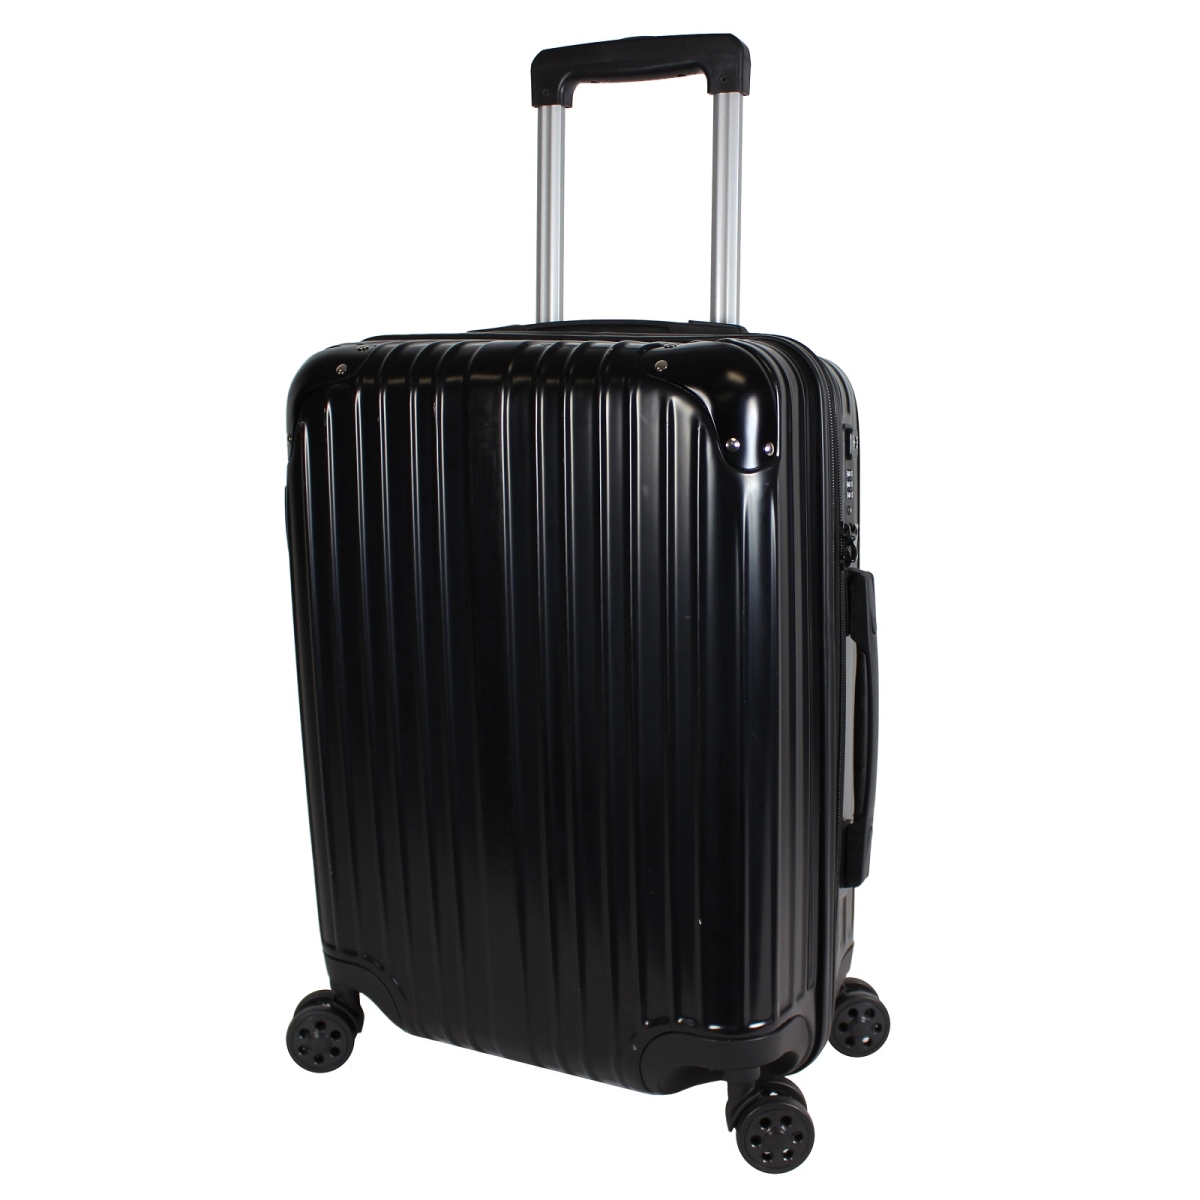 Wt046-black 20 In. Cruise Hardside Spinner Carry On Upright Luggage, Black